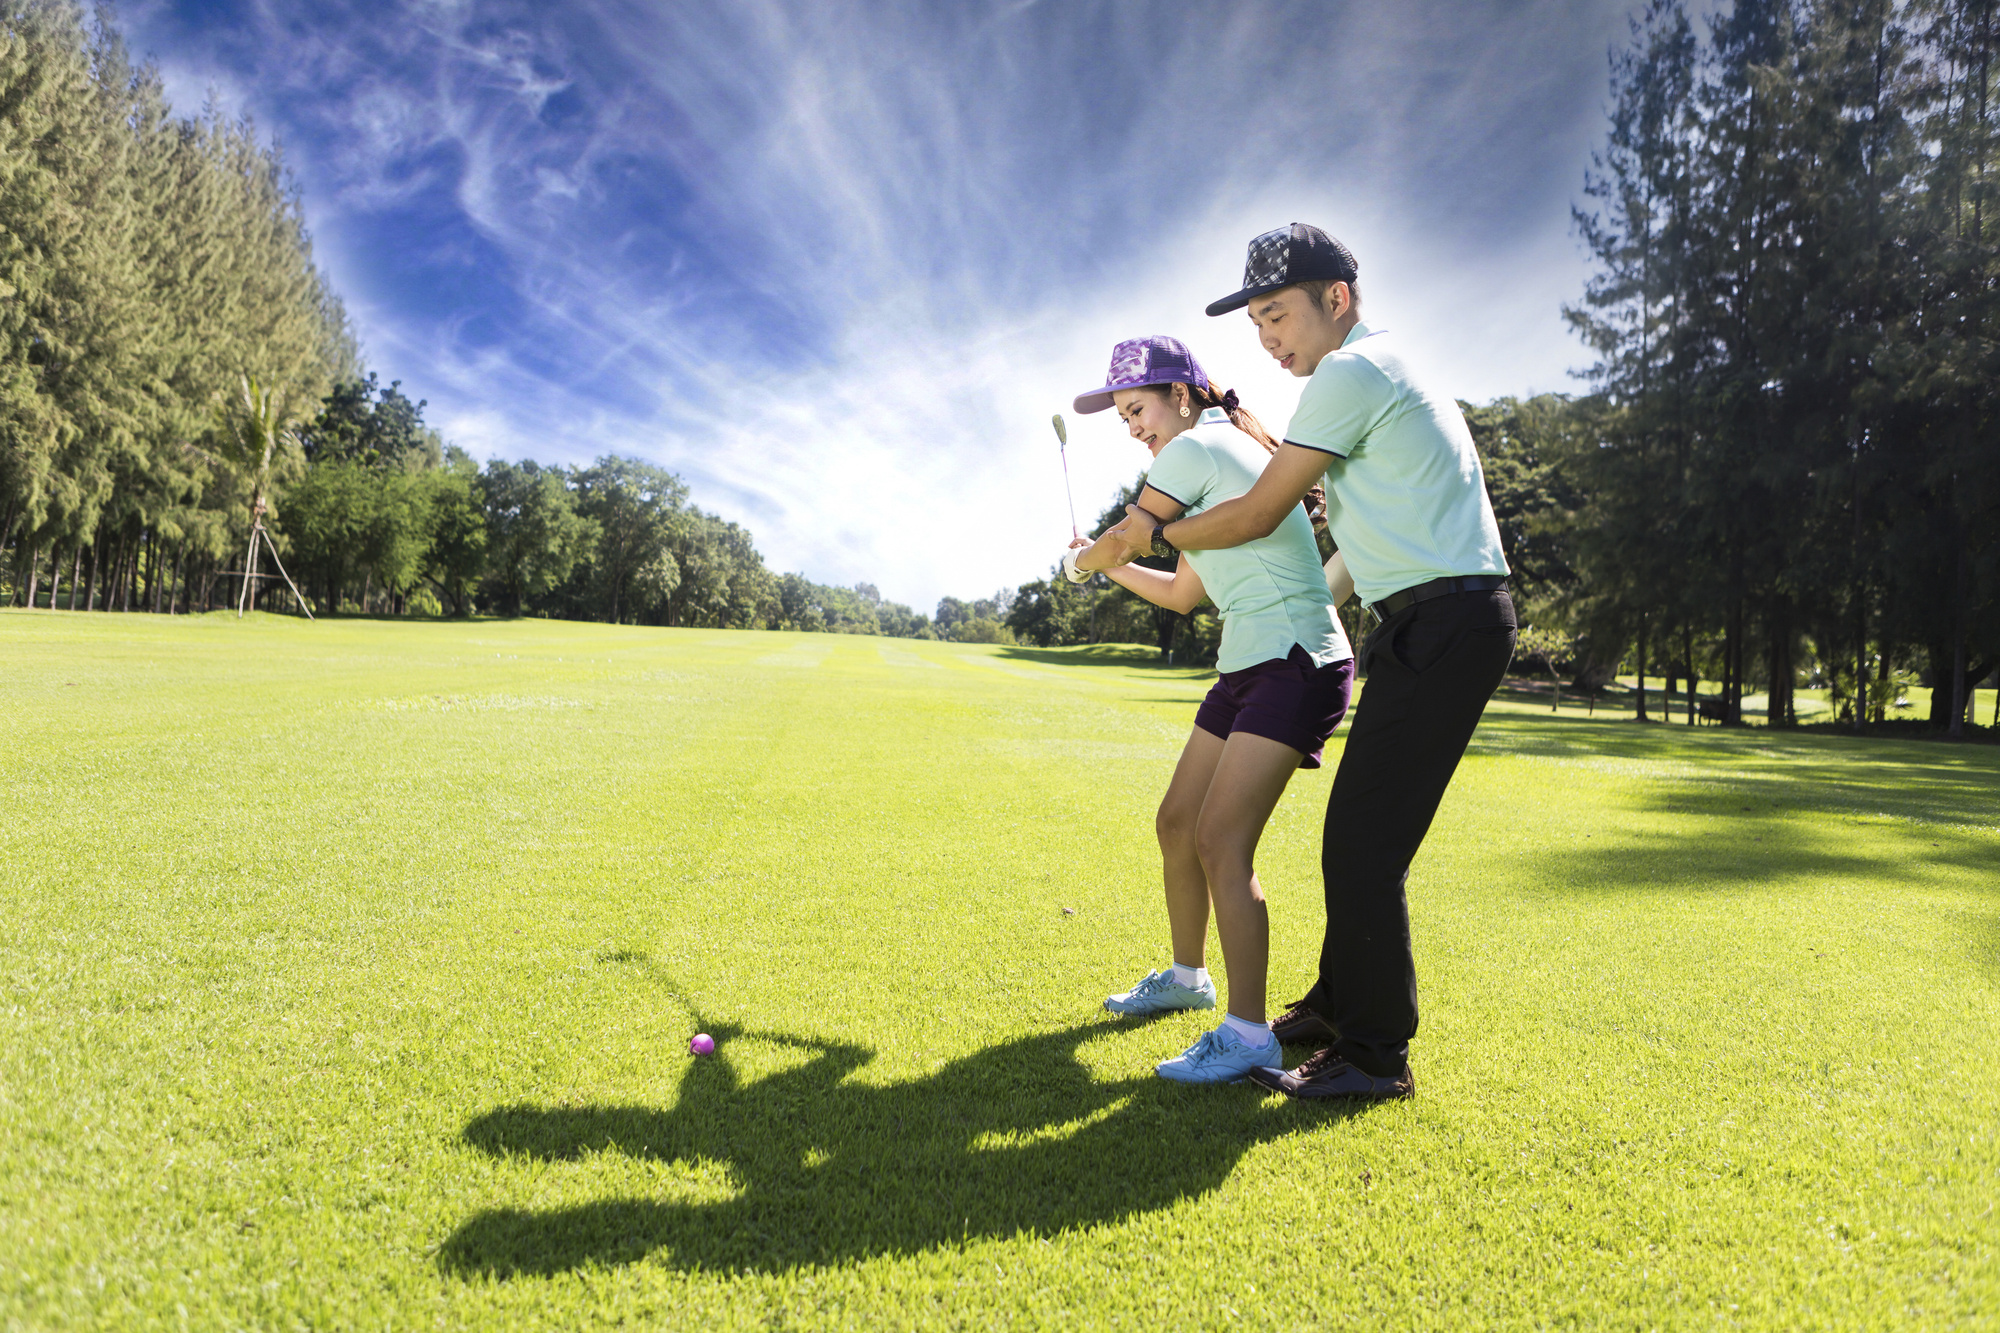 How to Make the Most Out of Your Golf Lesson